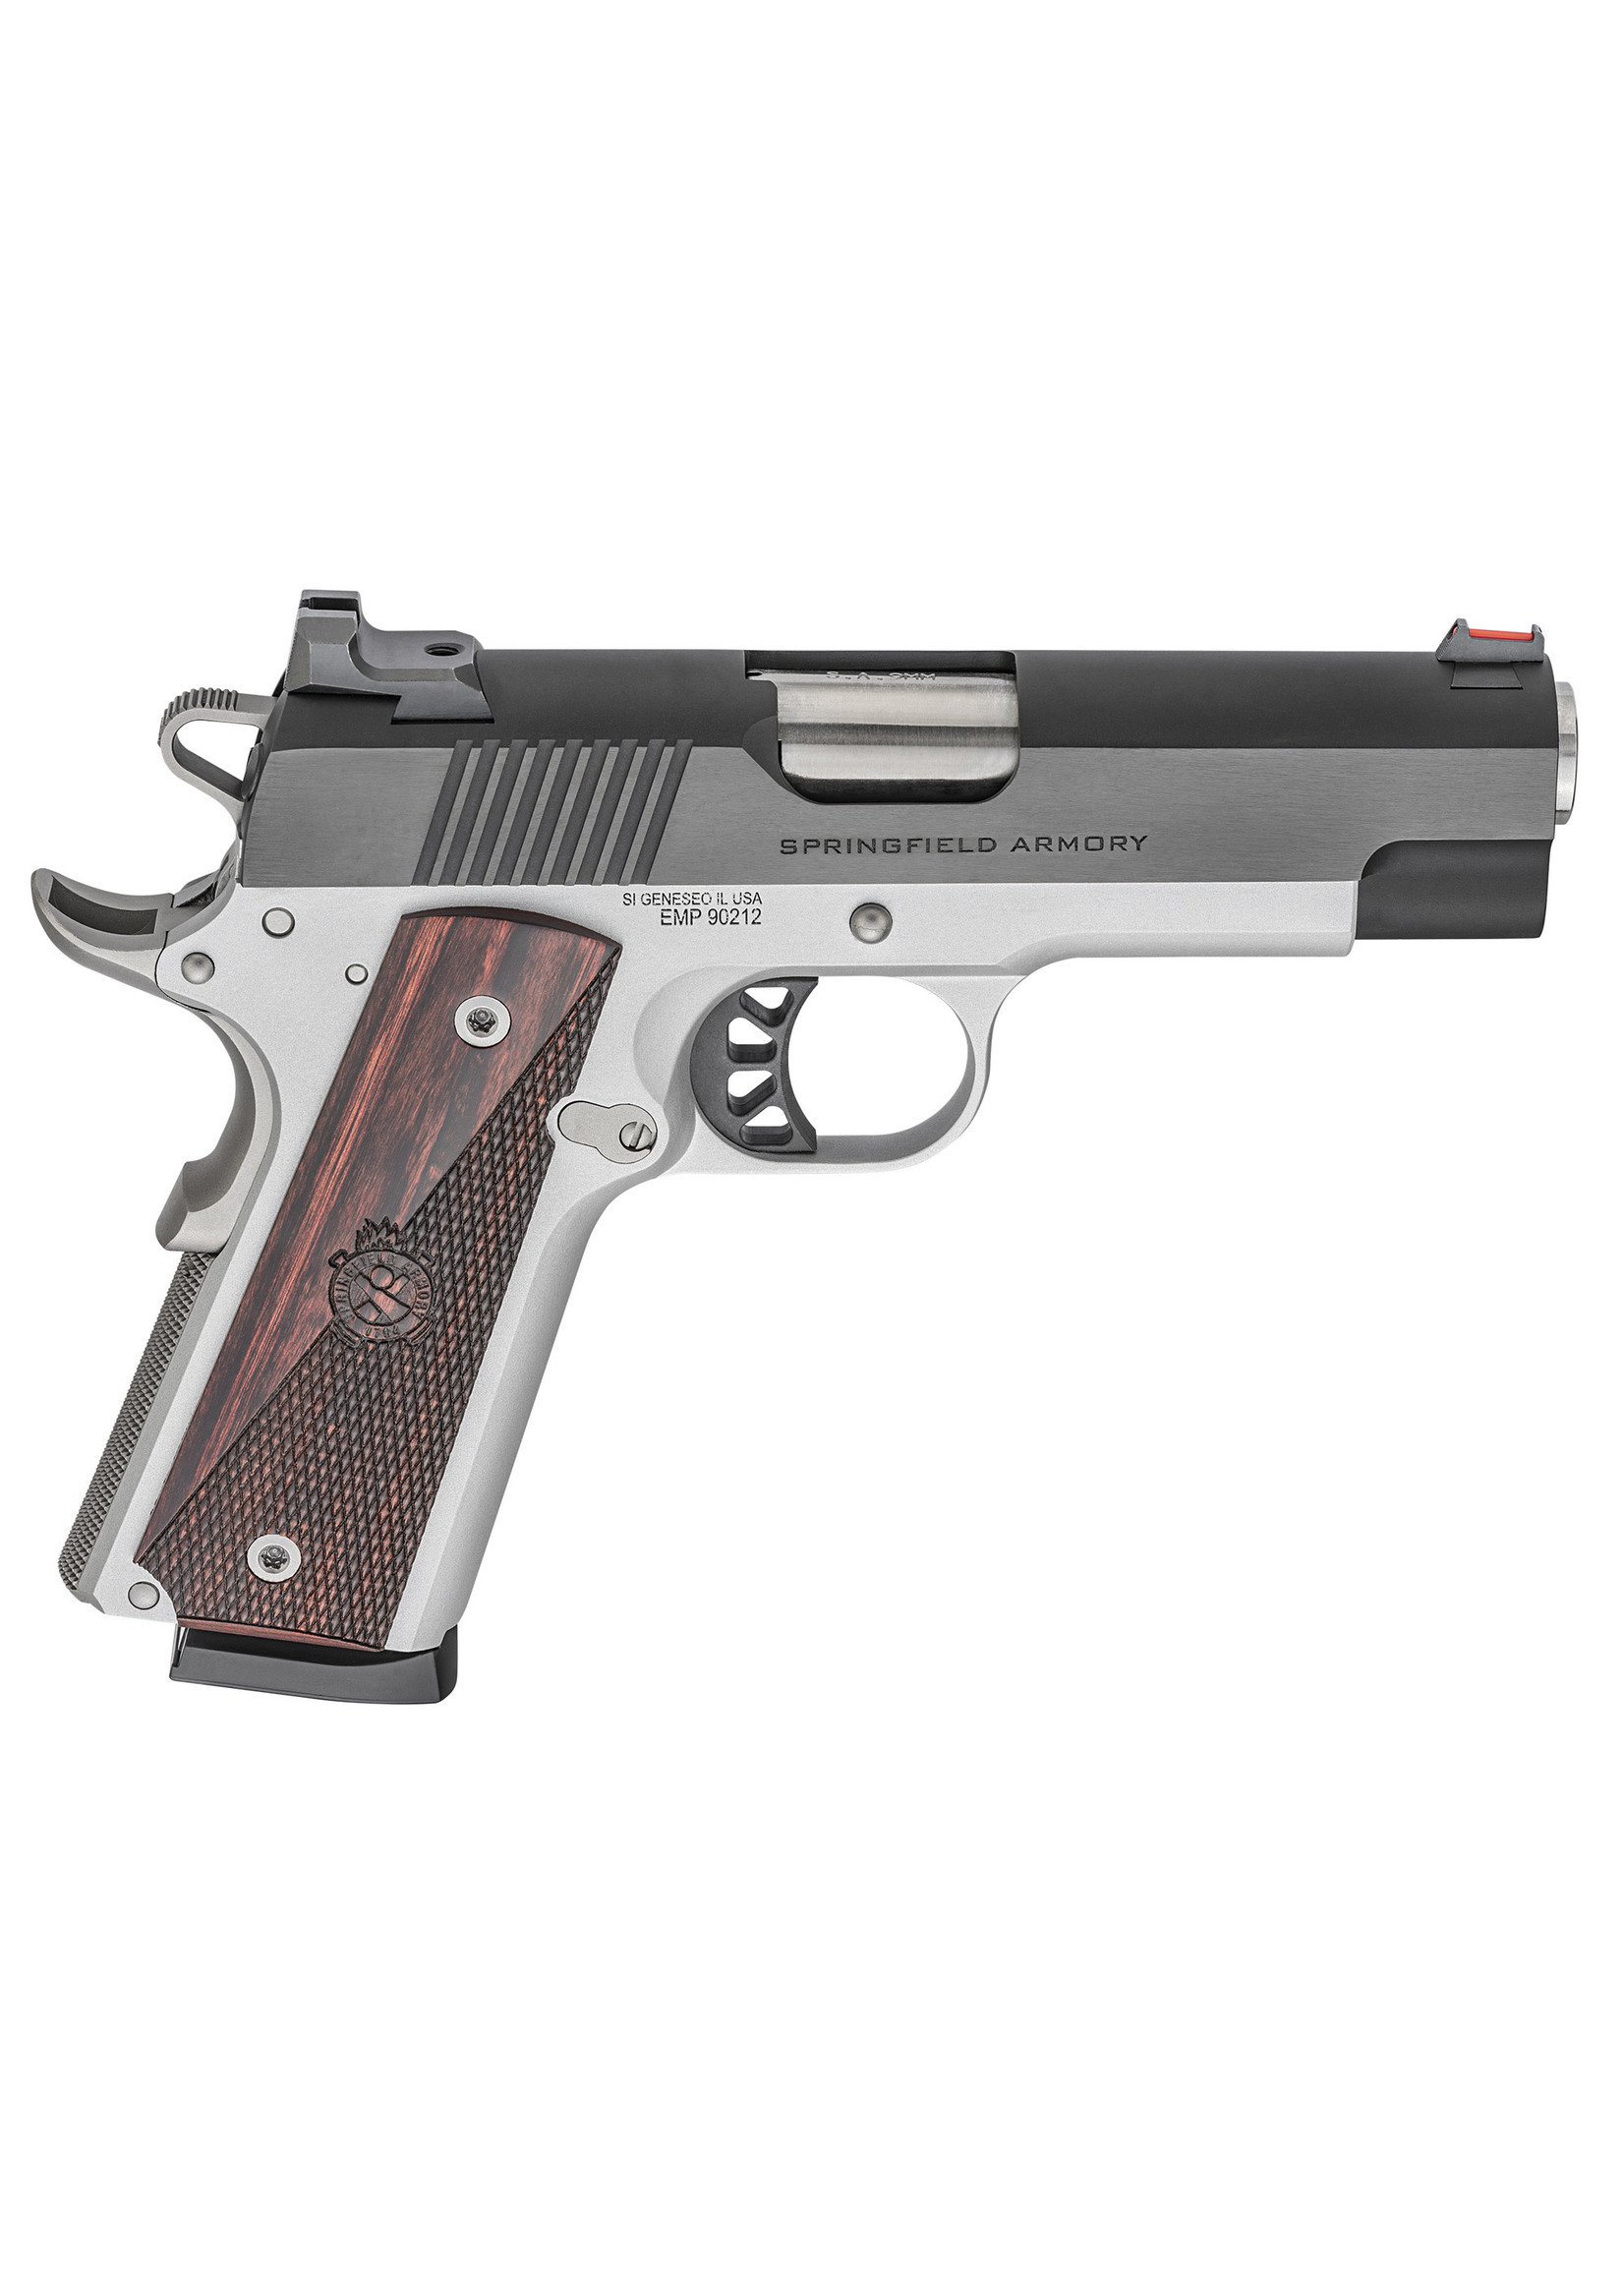 Springfield Armory Springfield Armory 1911 Ronin EMP 9mm Luger Caliber with 4" Barrel, 10+1 Capacity, Satin Aluminum Cerakote Finish Beavertail Frame, Serrated Blued Carbon Steel Slide & Textured Wood Grip